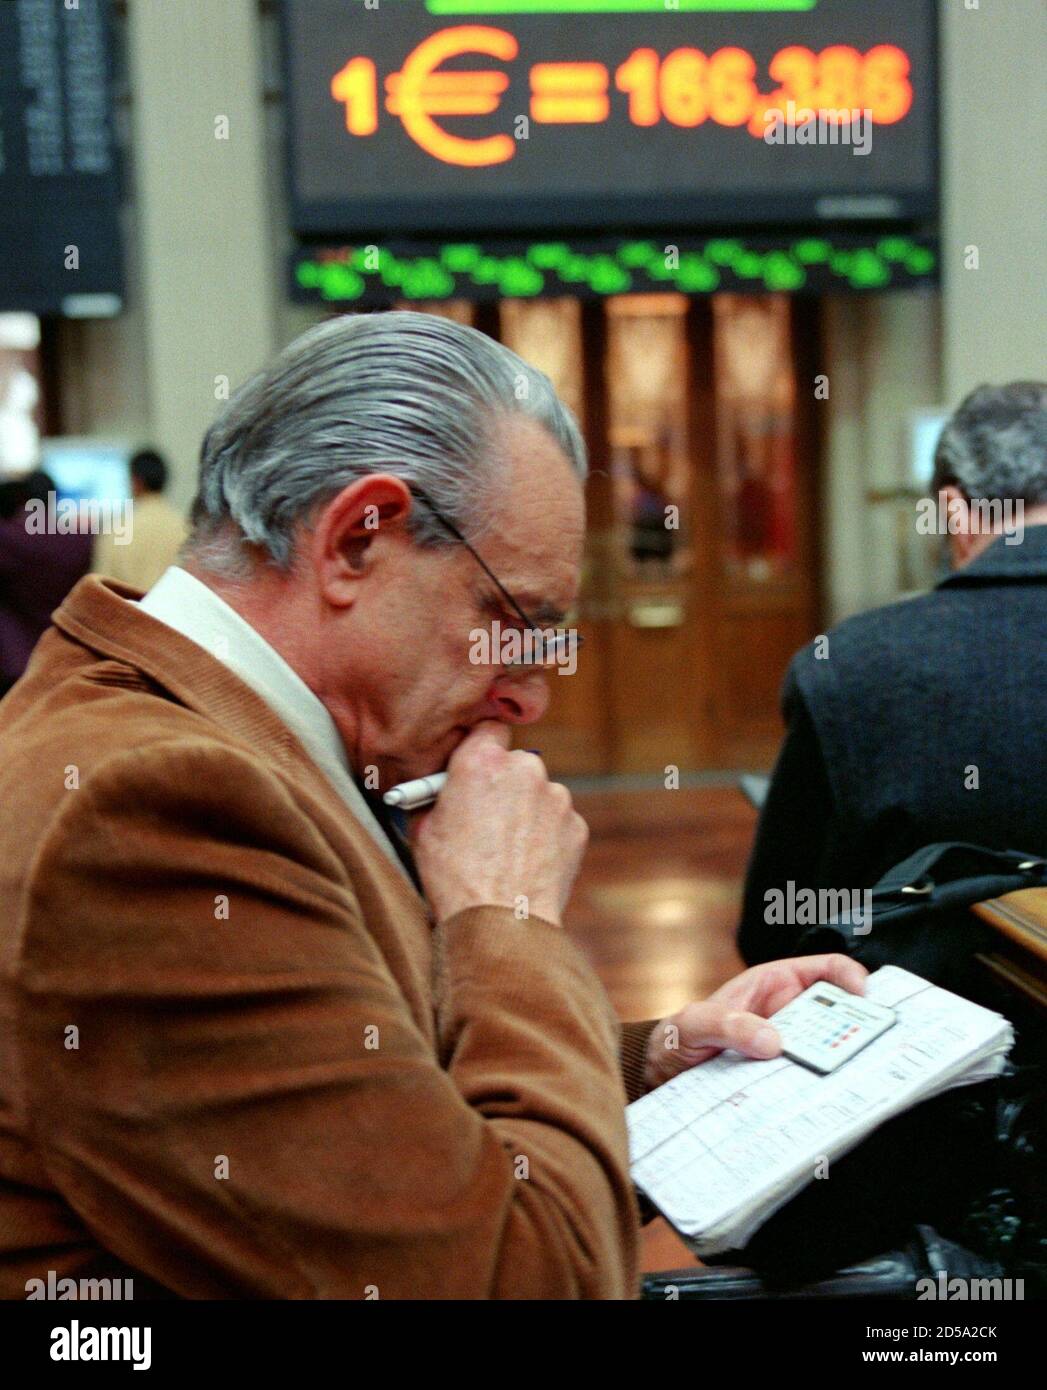 A man uses a calculator in front of a pannel showing the euro conversion  rate for the peseta at Madrid's Bourse on the first day of trading in euros  January 4. Spanish